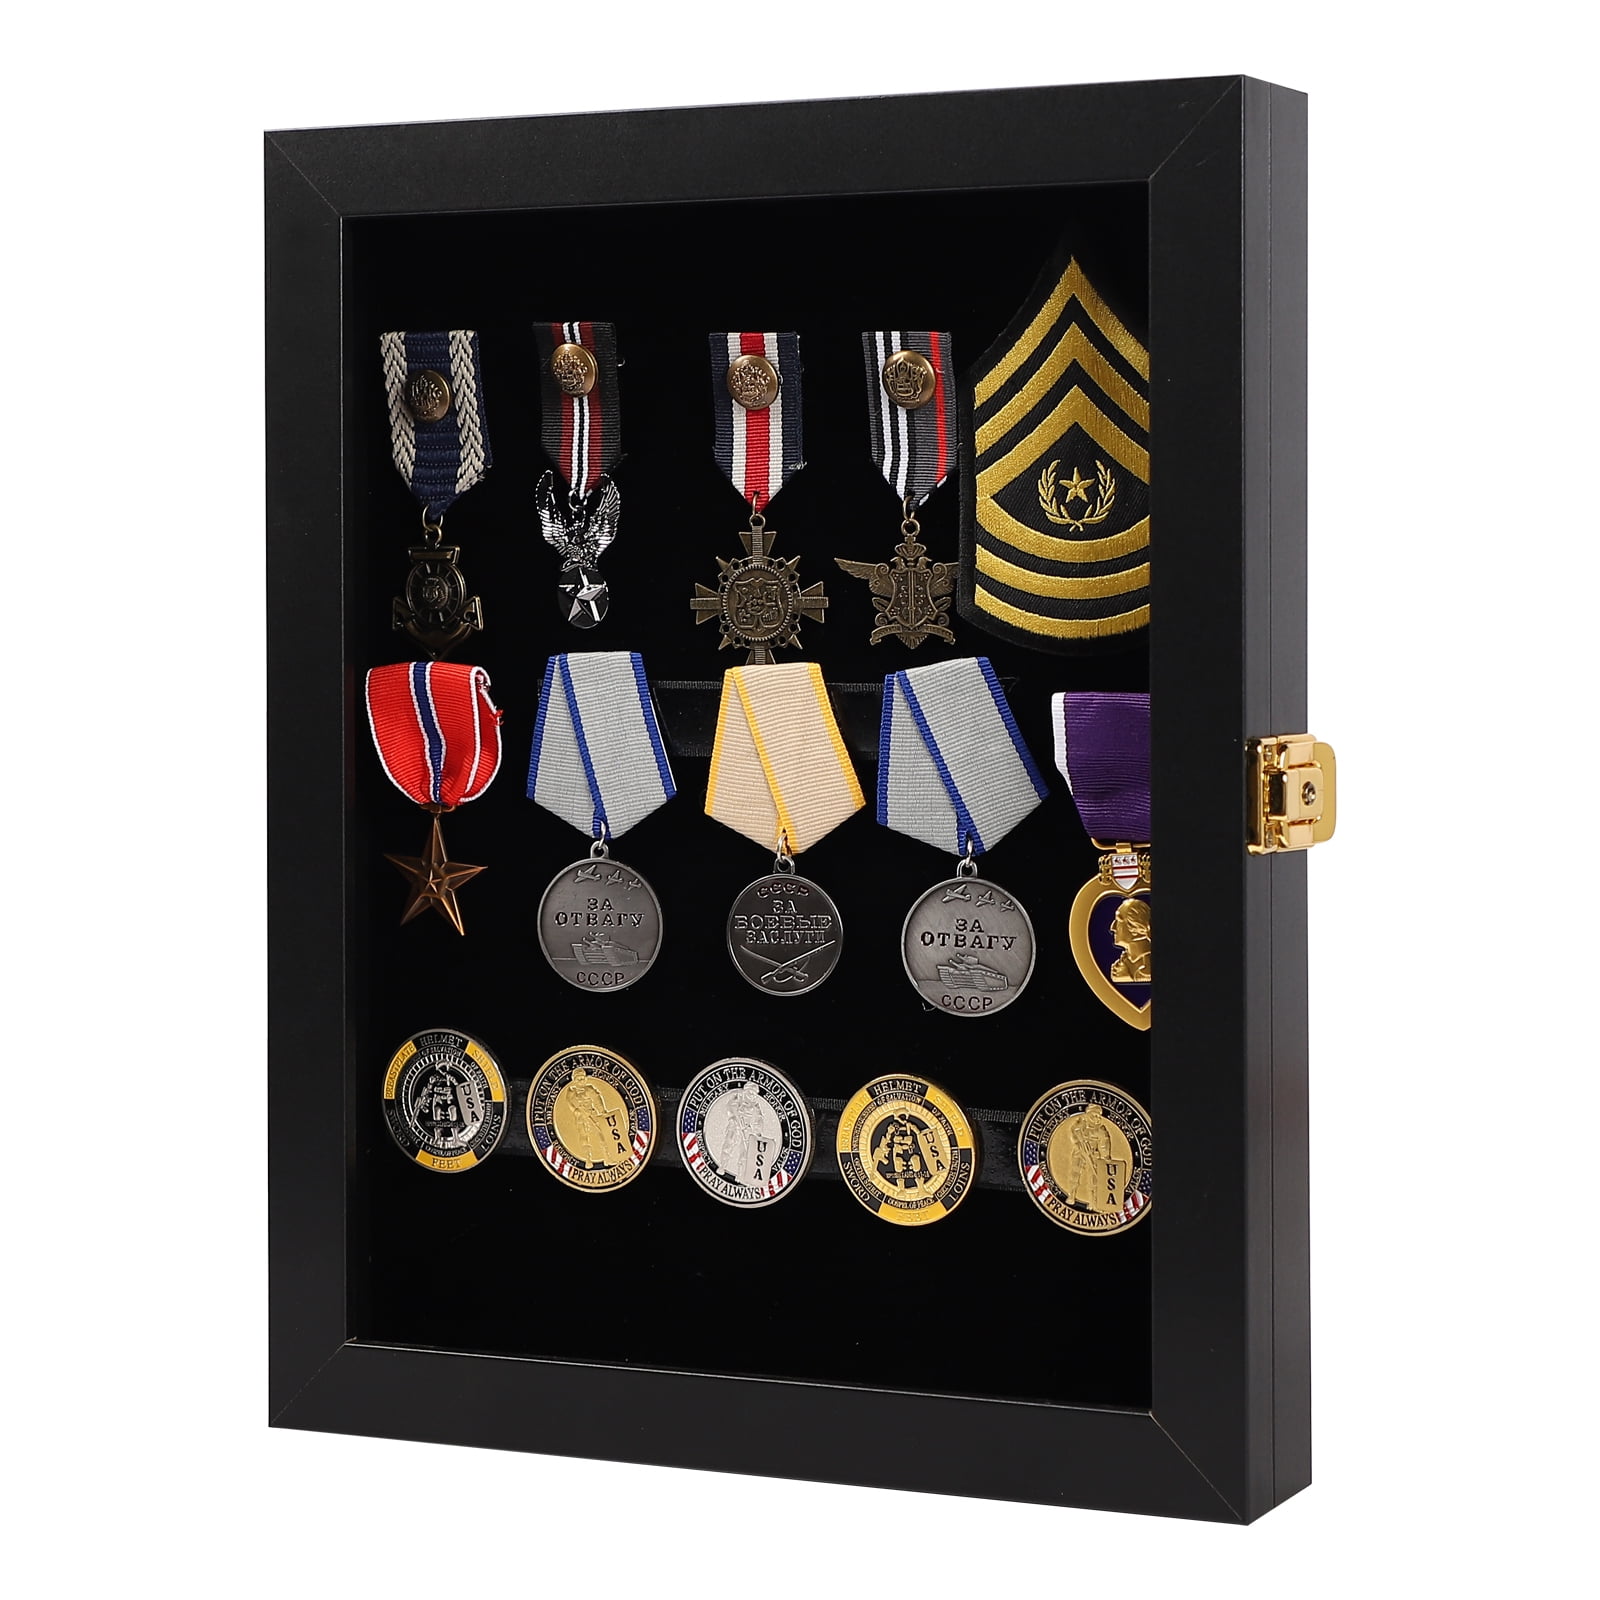  Large Pin Display Case - 25 X 16 Pin Collection Display with  98% UV Protection Acryliic Door for Military Medals, Beach Tags, Jewelry  Pins, Pin Gift, Insignia Ribbons, Pin Enthusiast Collectibles 